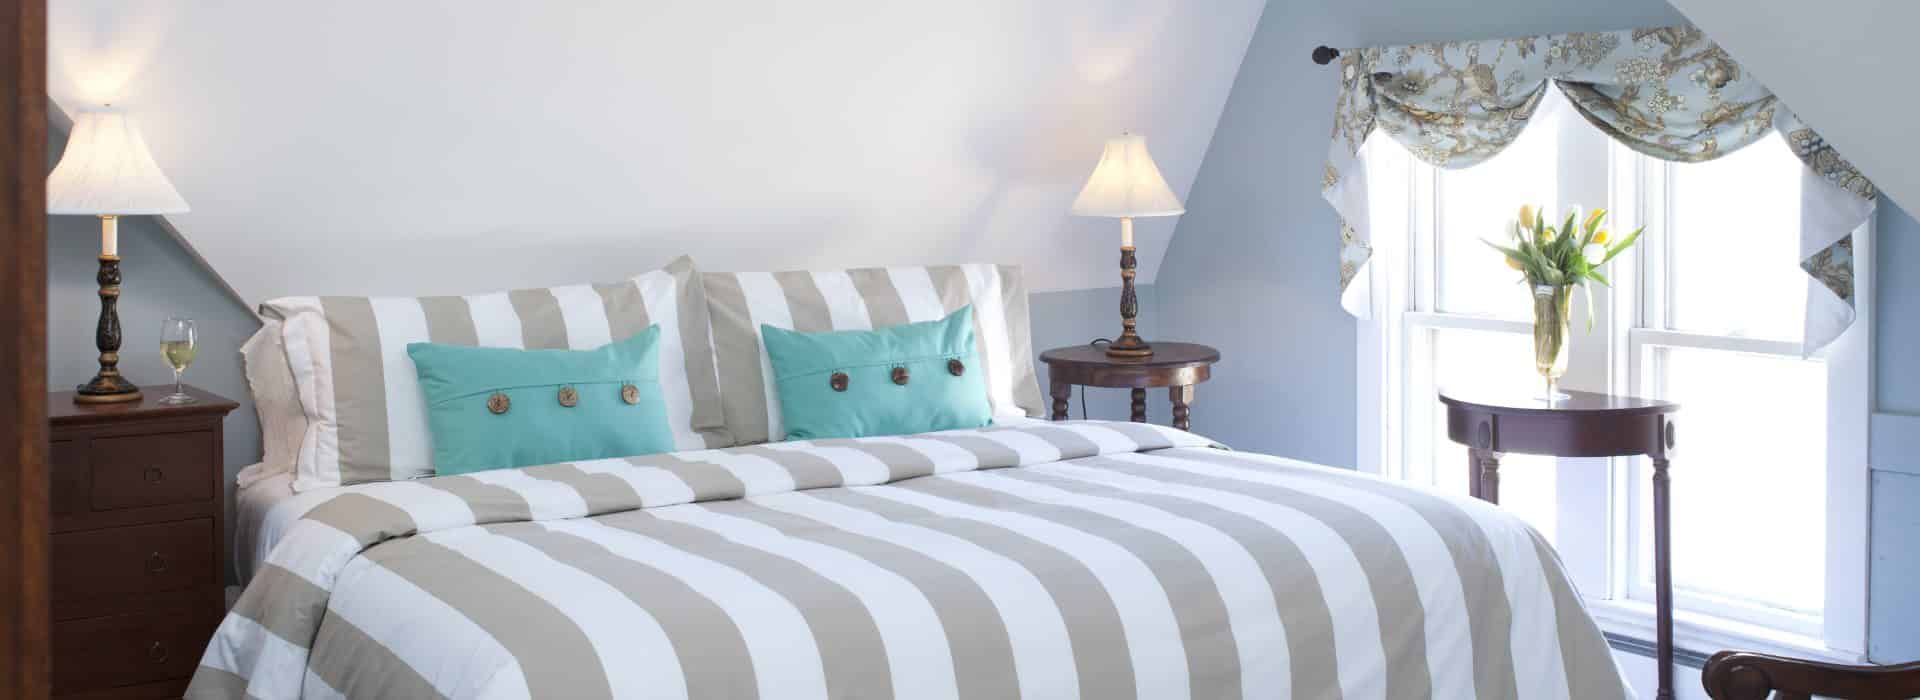 Bedroom with light gray-blue walls, white trim, taupe and white striped bedding, turquoise accent pillows, and dark wooden furniture